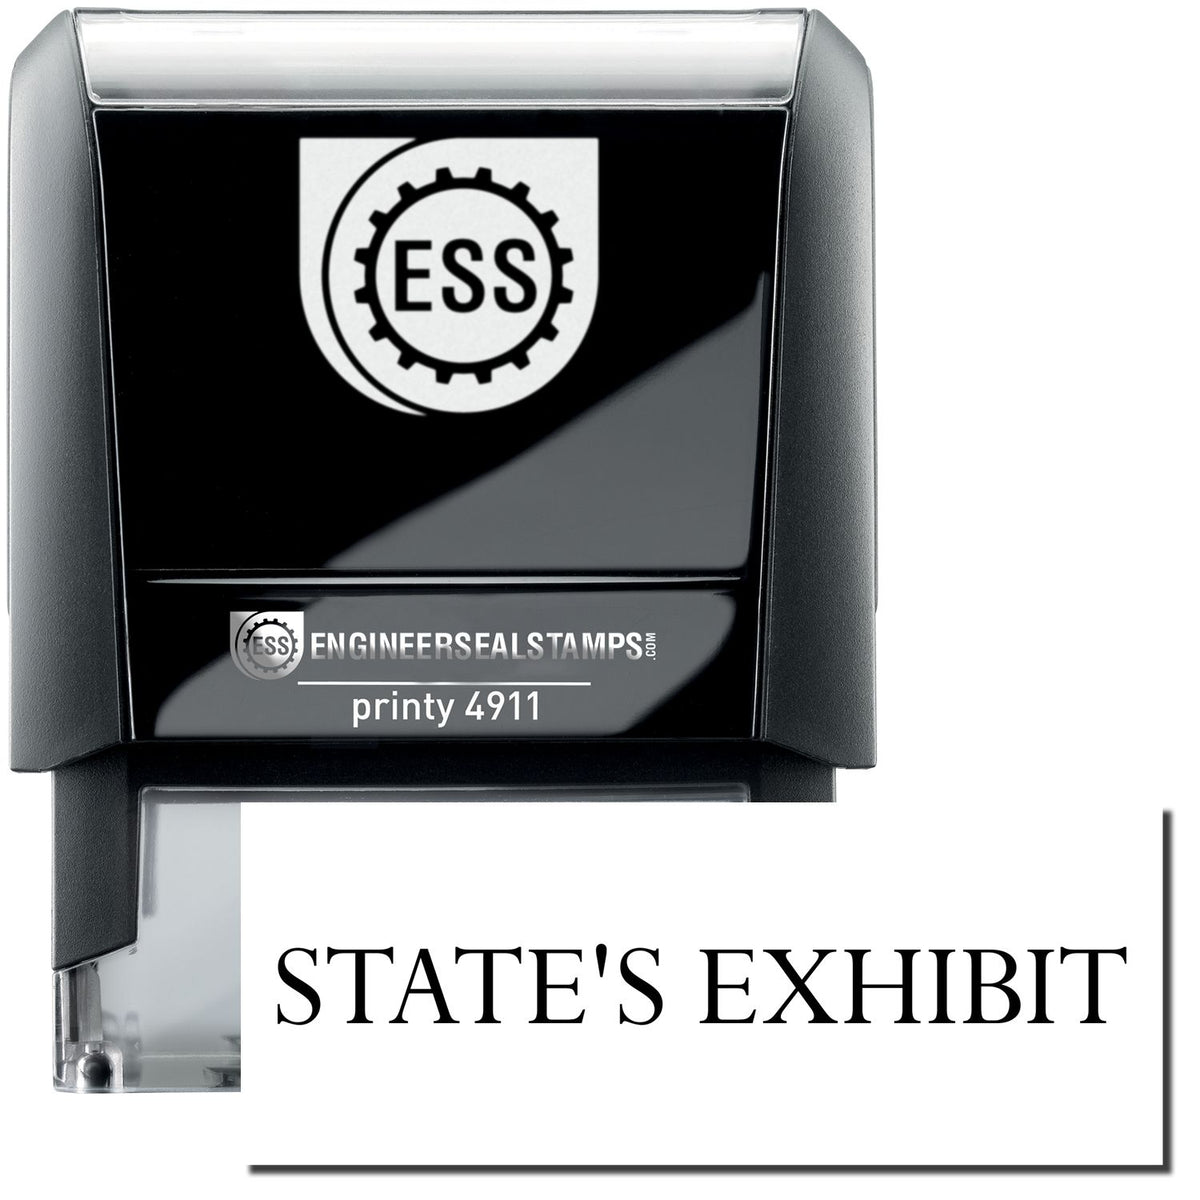 A self-inking stamp with a stamped image showing how the text &quot;STATE&#39;S EXHIBIT&quot; is displayed after stamping.